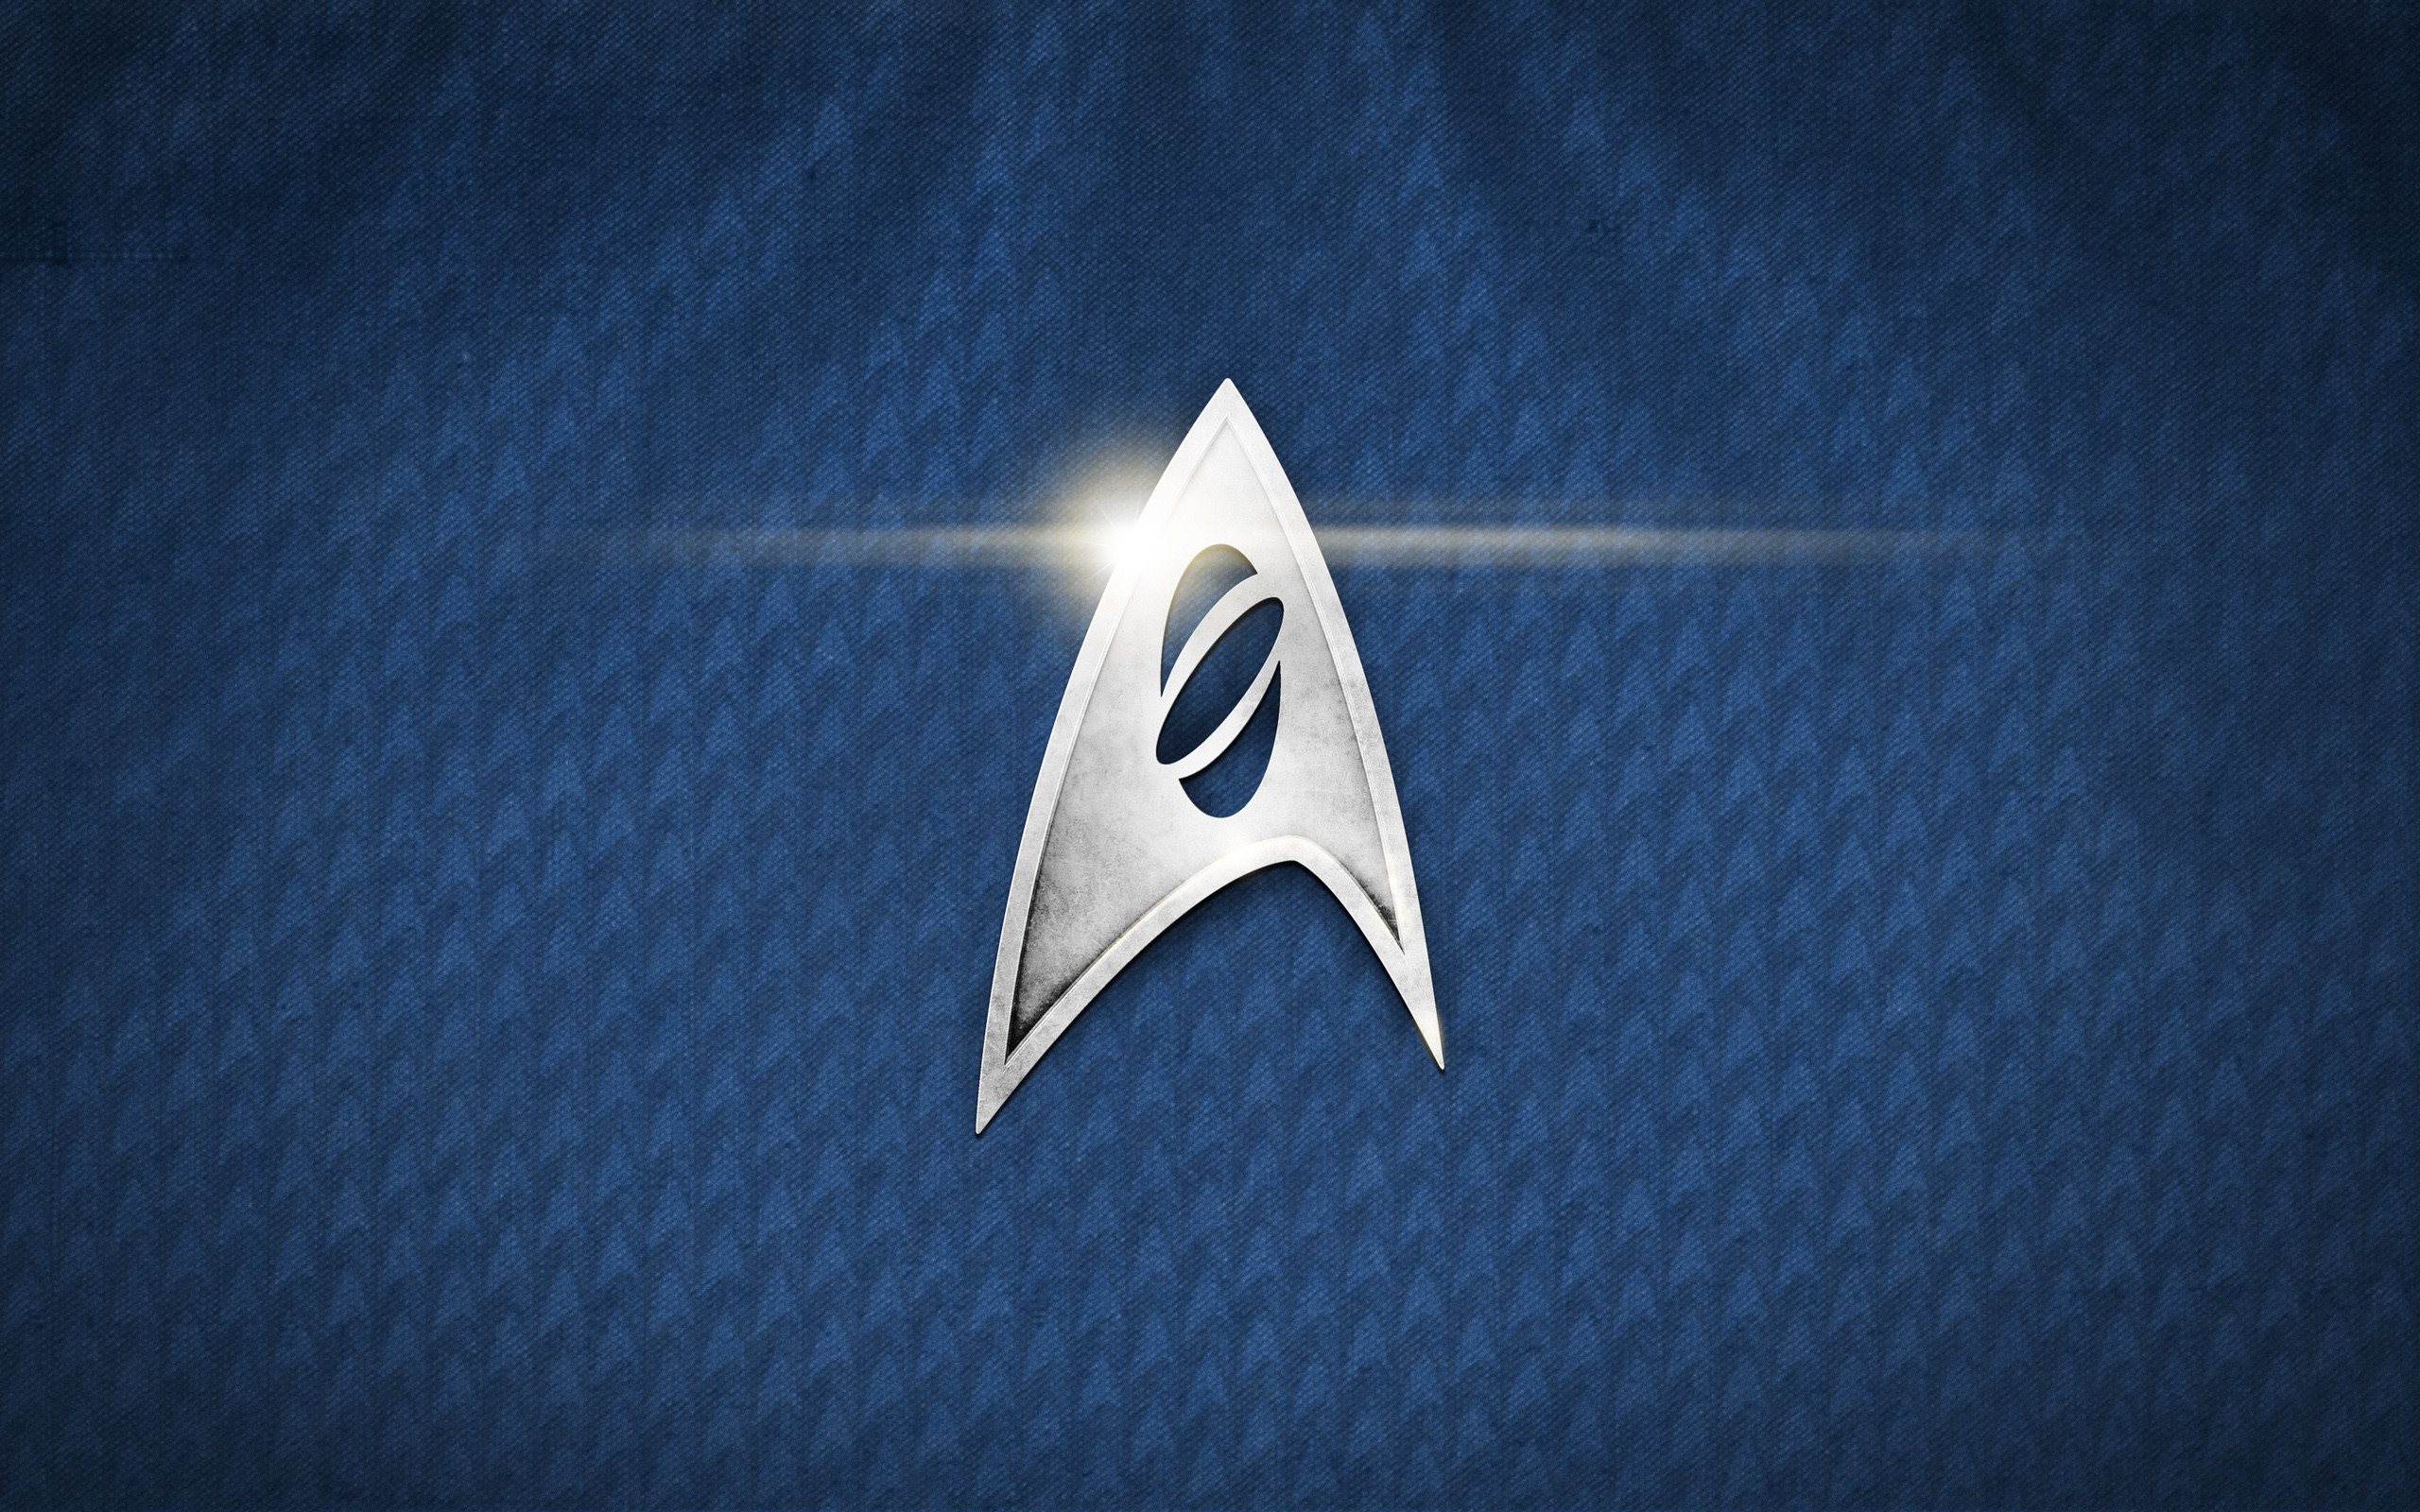 2560x1600 logo star trek wallpapers hd pictures download hd background wallpapers  free amazing cool tablet 4k high definition 2560Ã1600 Wallpaper HD